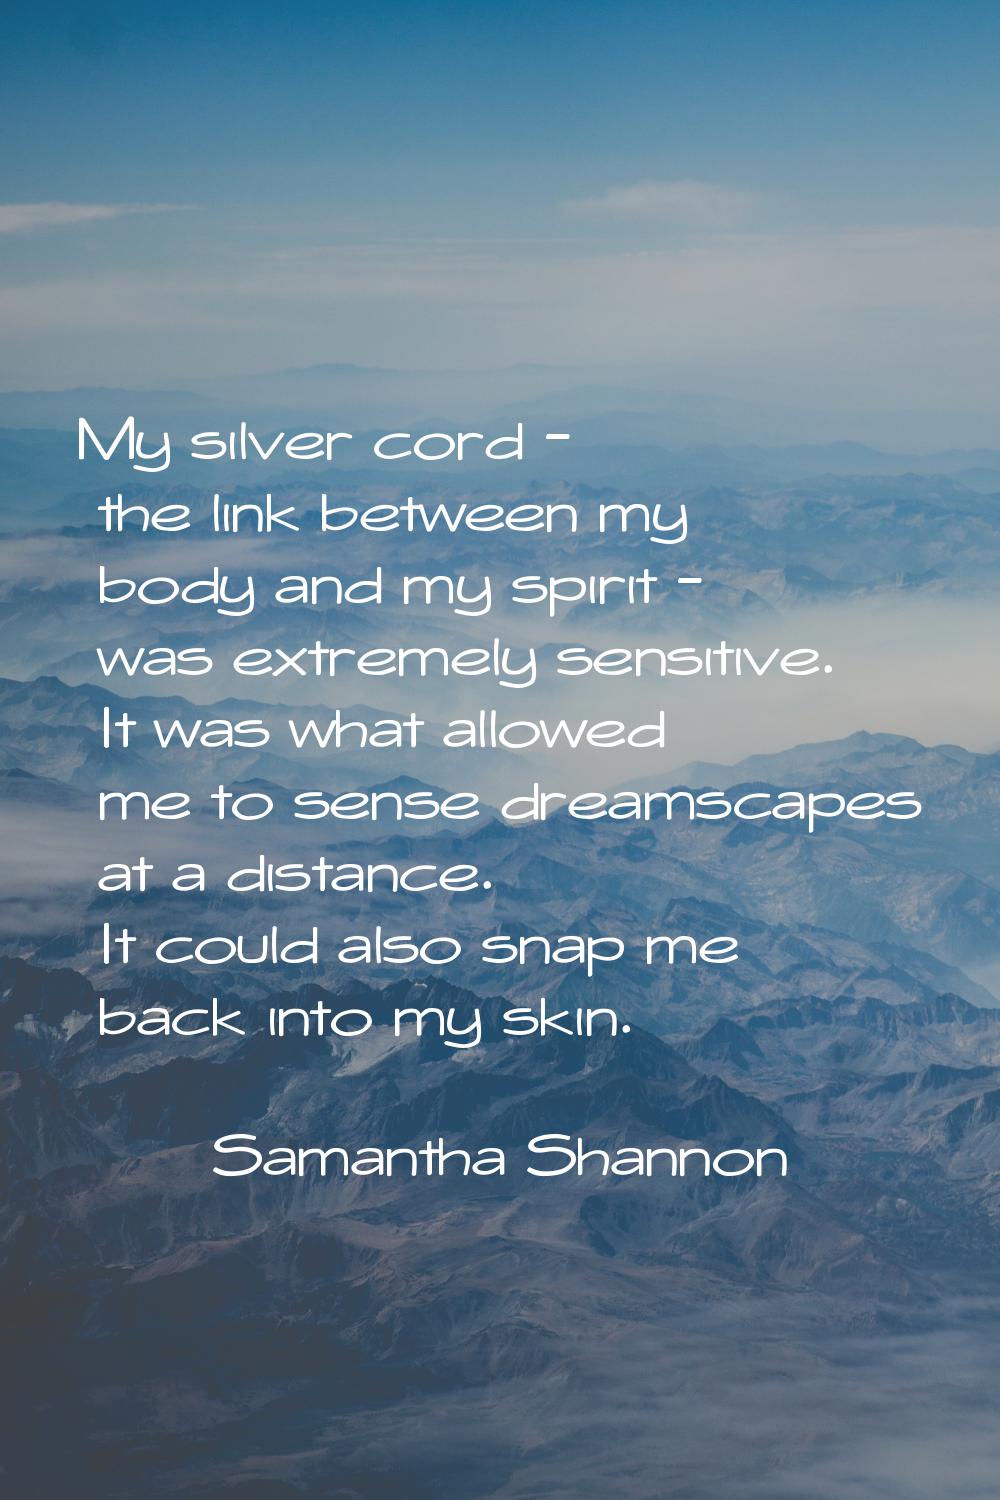 My silver cord - the link between my body and my spirit - was extremely sensitive. It was what allo